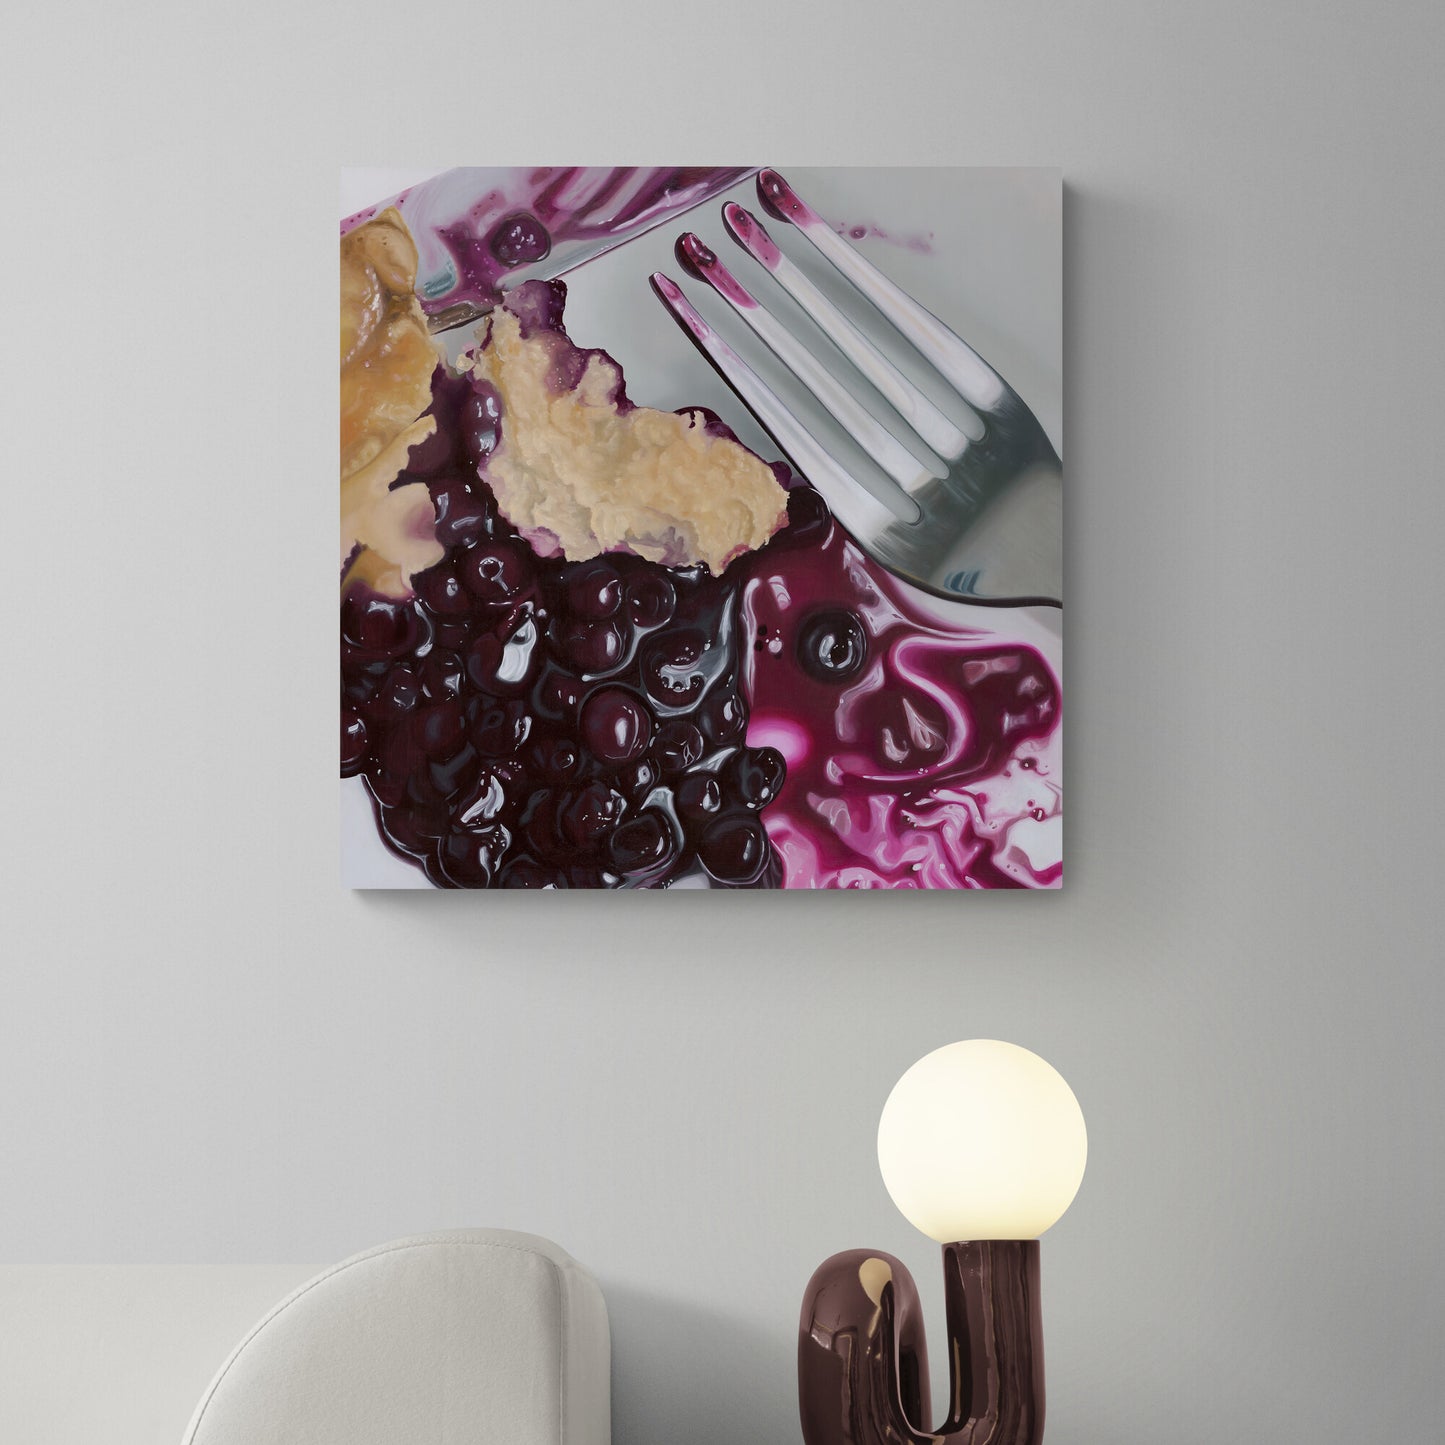 The original painting “Indulgence" by Hannah Kilby from Hannah Michelle Studios, displayed on a wall.